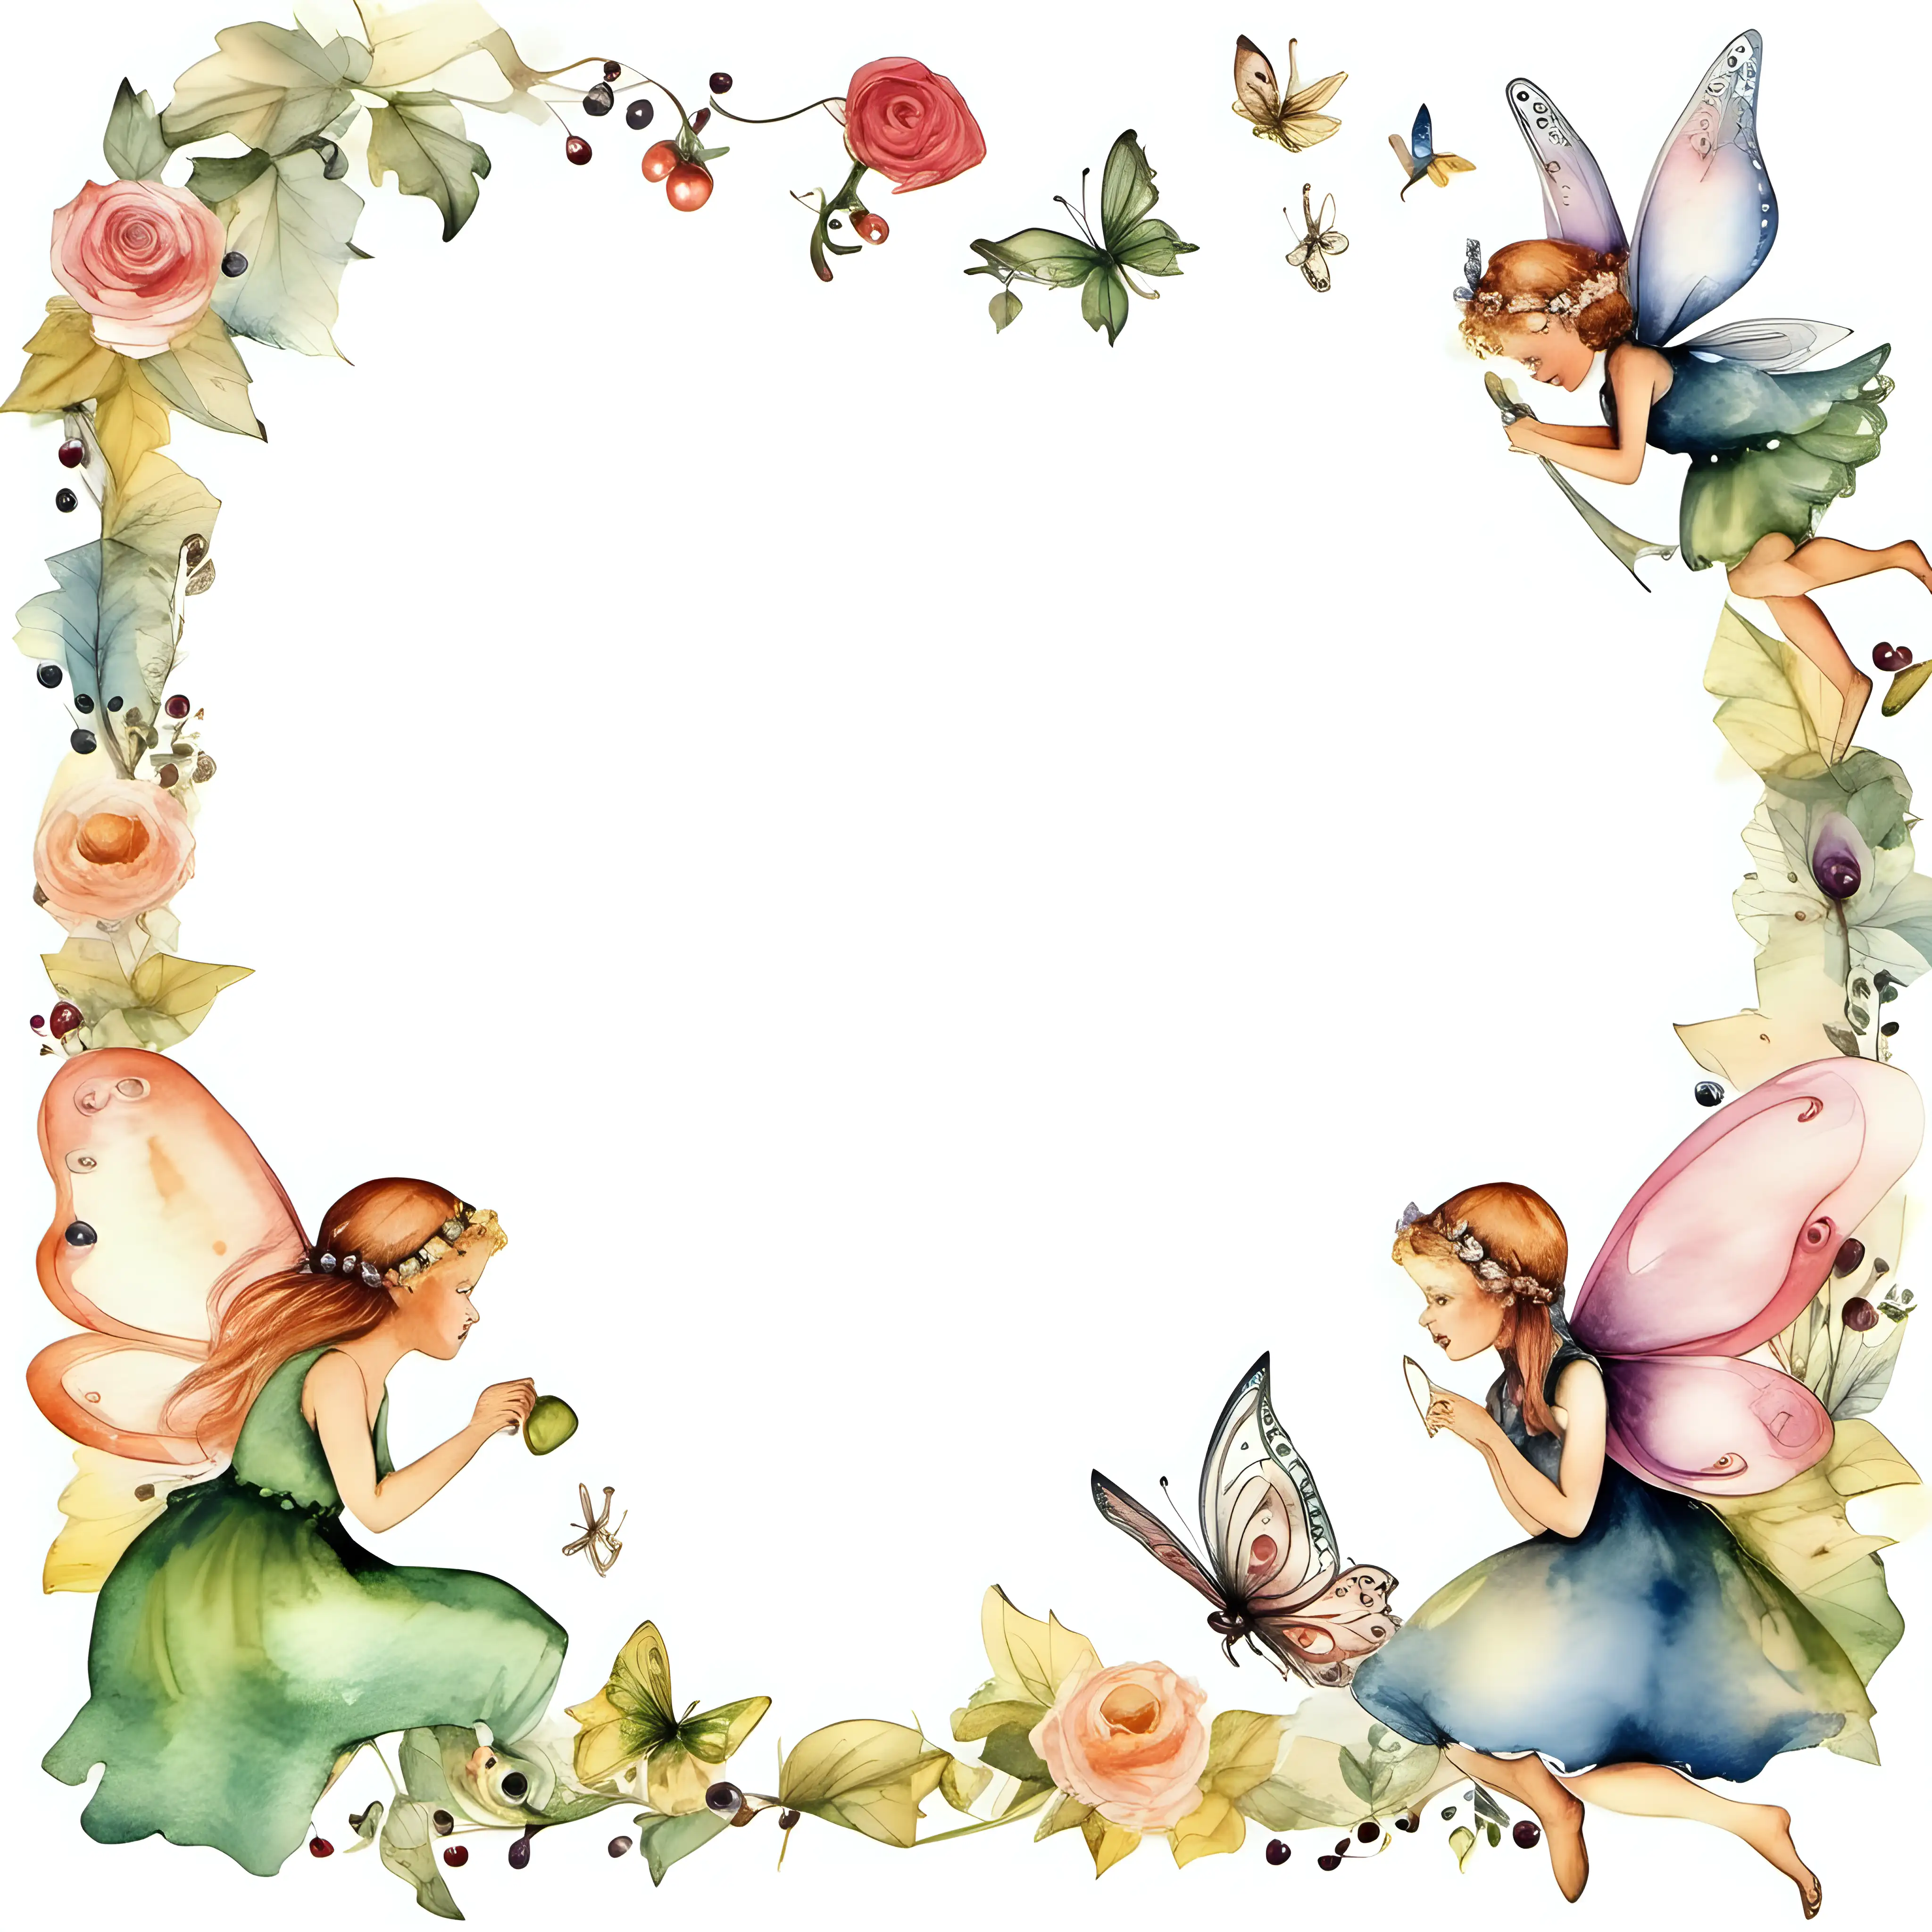 Whimsical Vintage Fairy Page Border HighQuality Watercolor Clipart